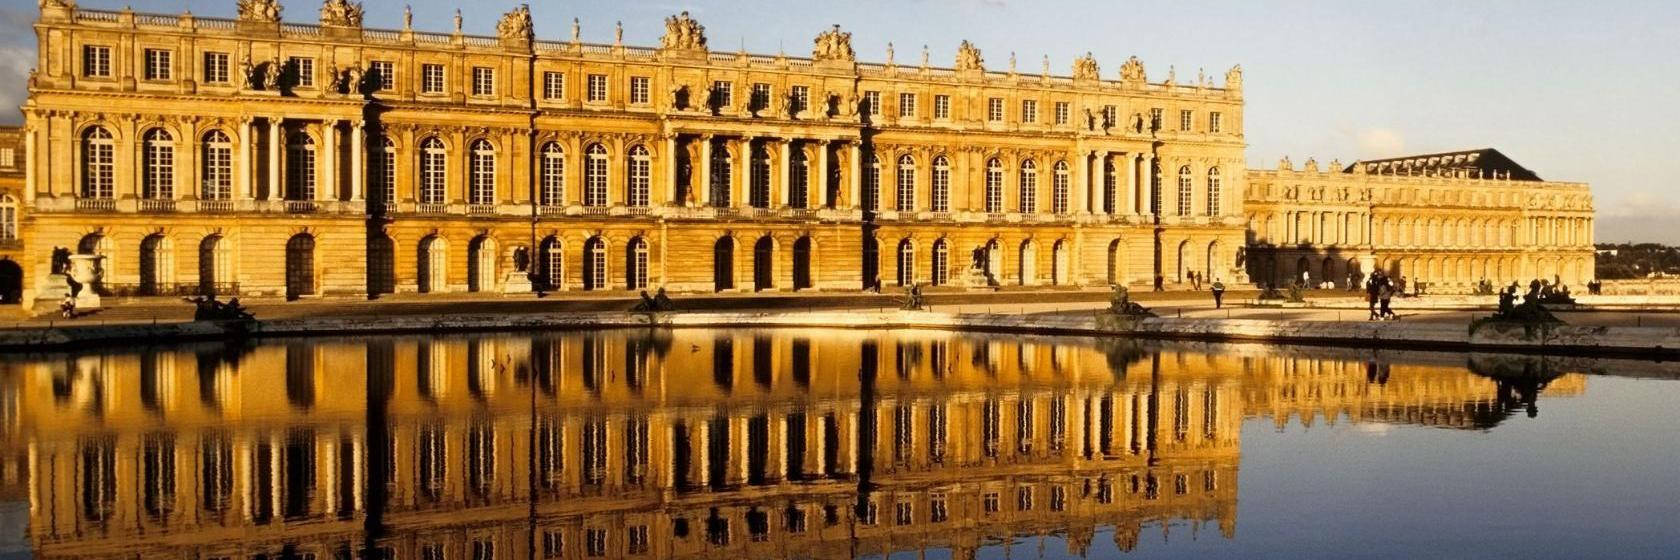 The Pool Near The Palace Of Of Versailles Picture